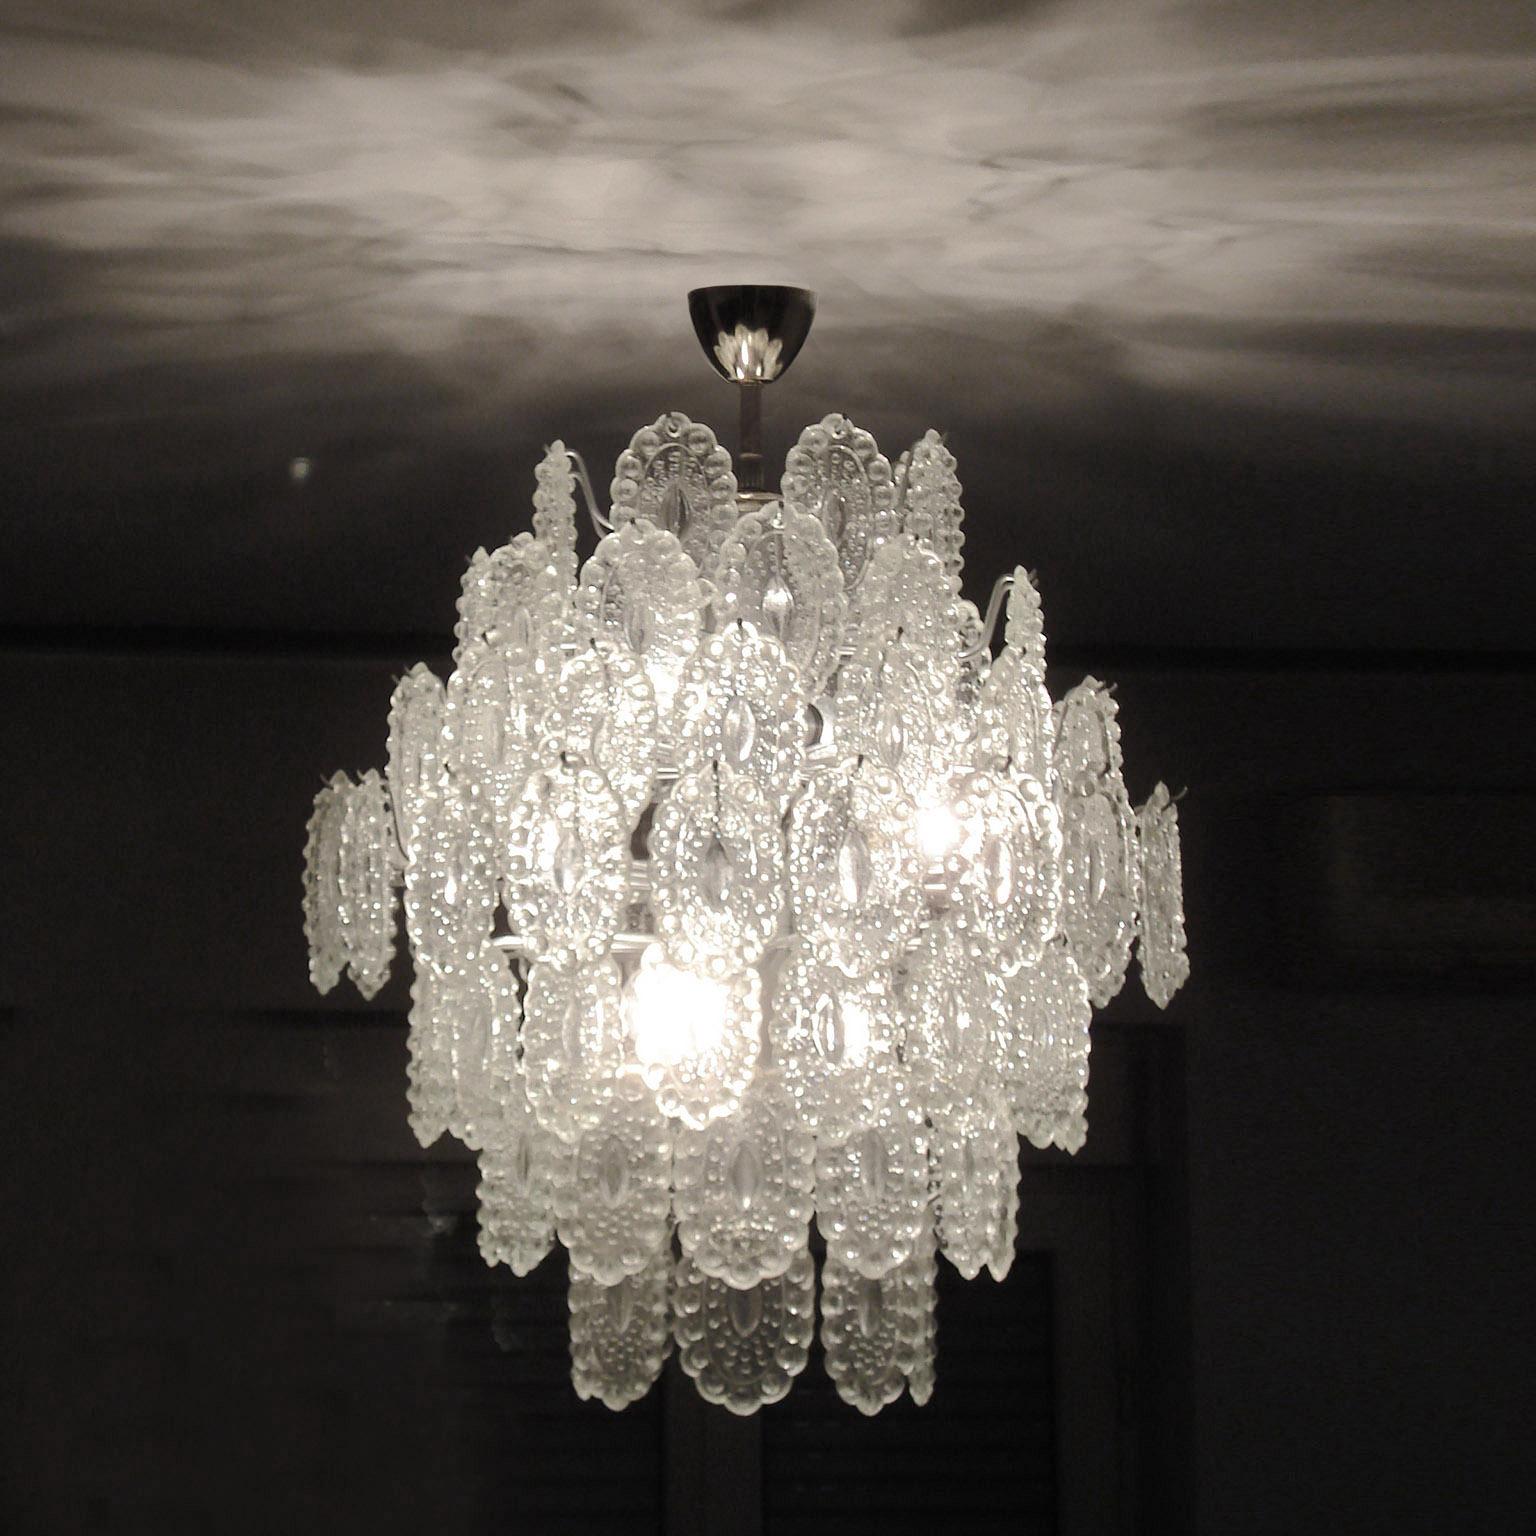 Painted Italian Crystal Glass Chandelier in the Style of Mazzega, 1 of 2 For Sale